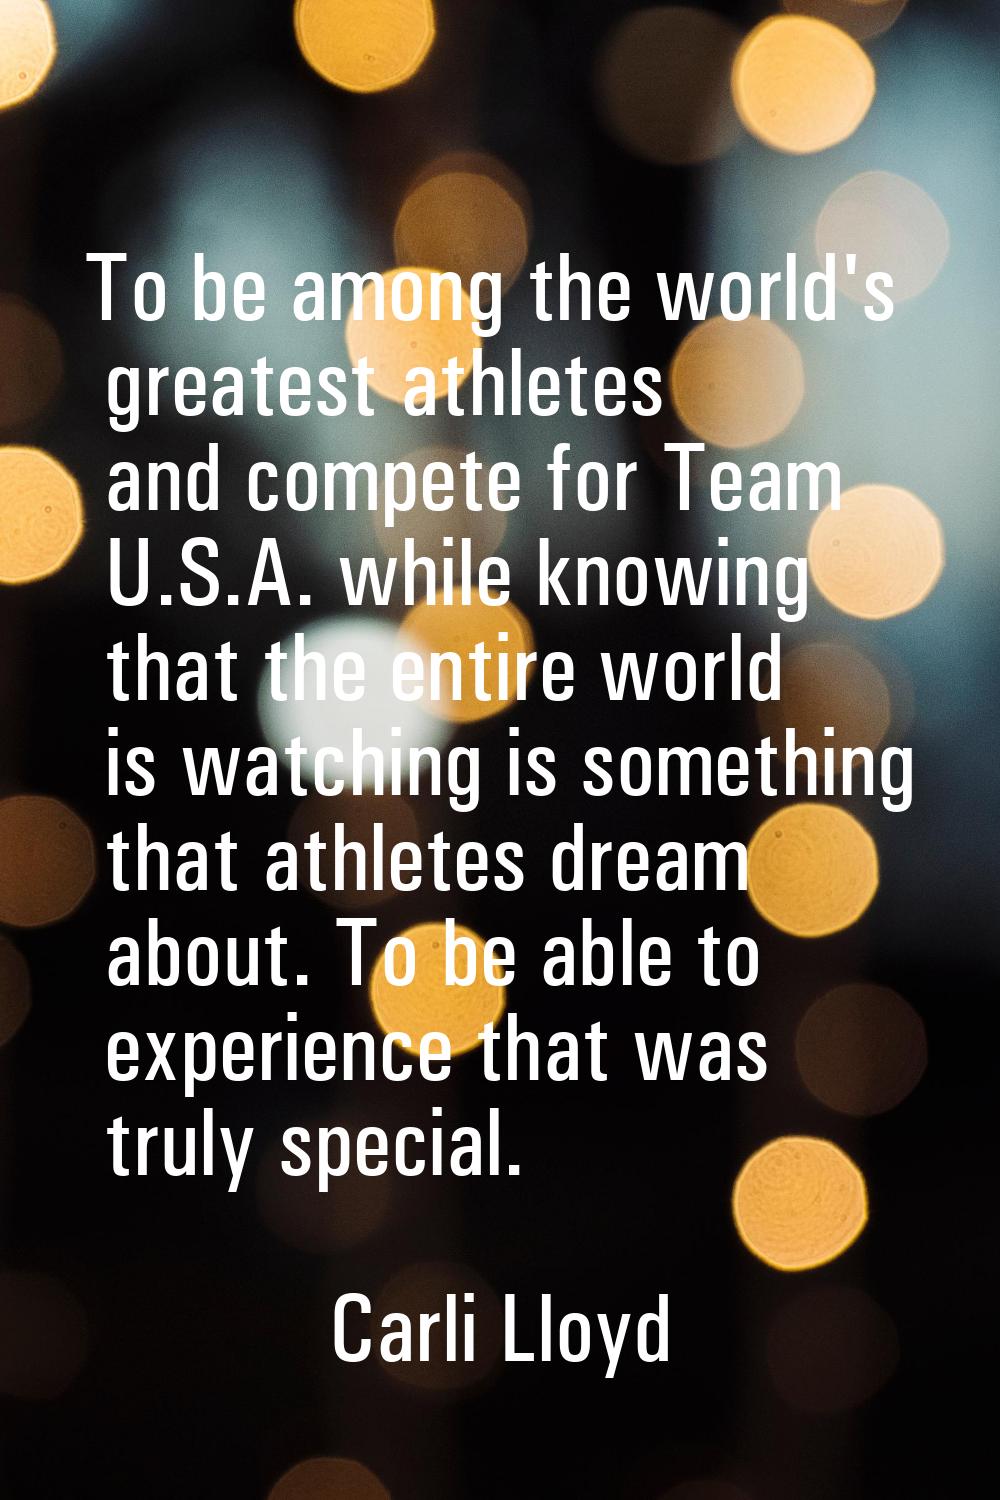 To be among the world's greatest athletes and compete for Team U.S.A. while knowing that the entire